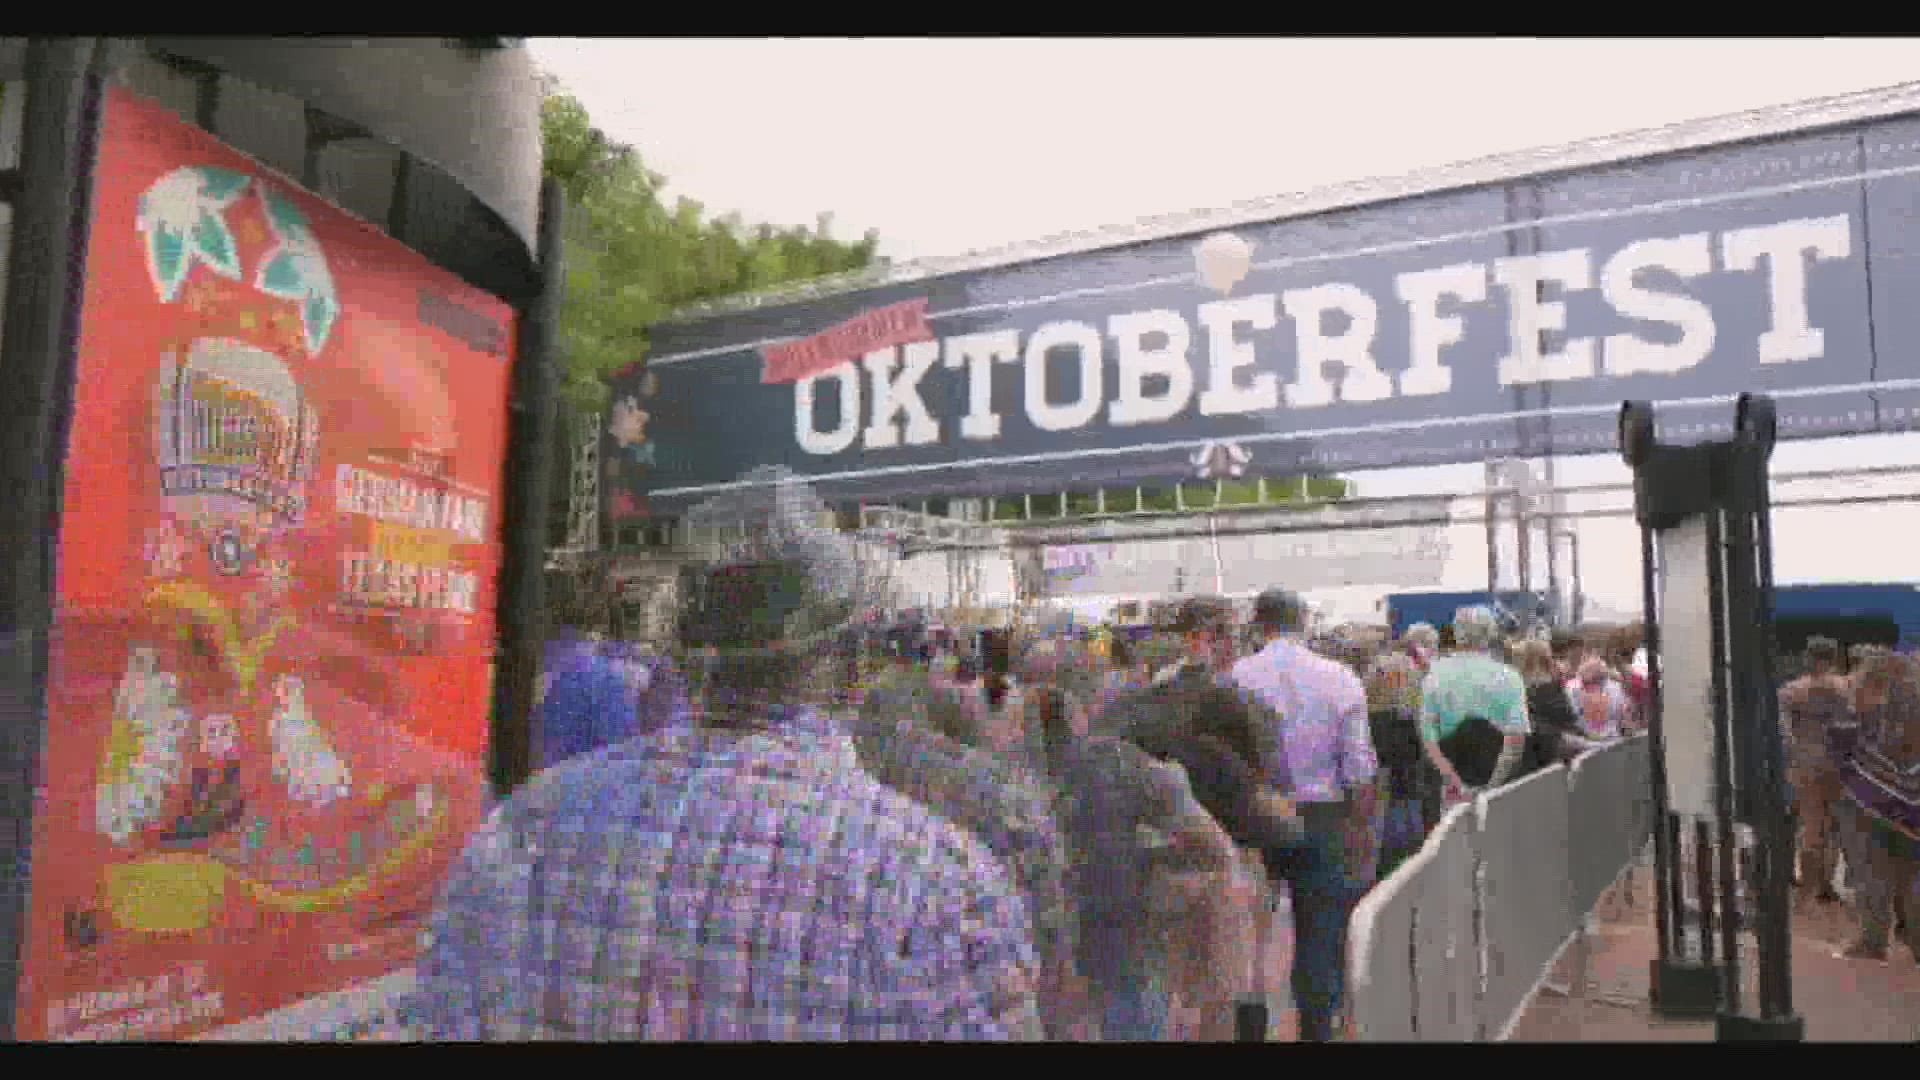 Looking for fall festivities like Oktoberfests galore? Look no more.